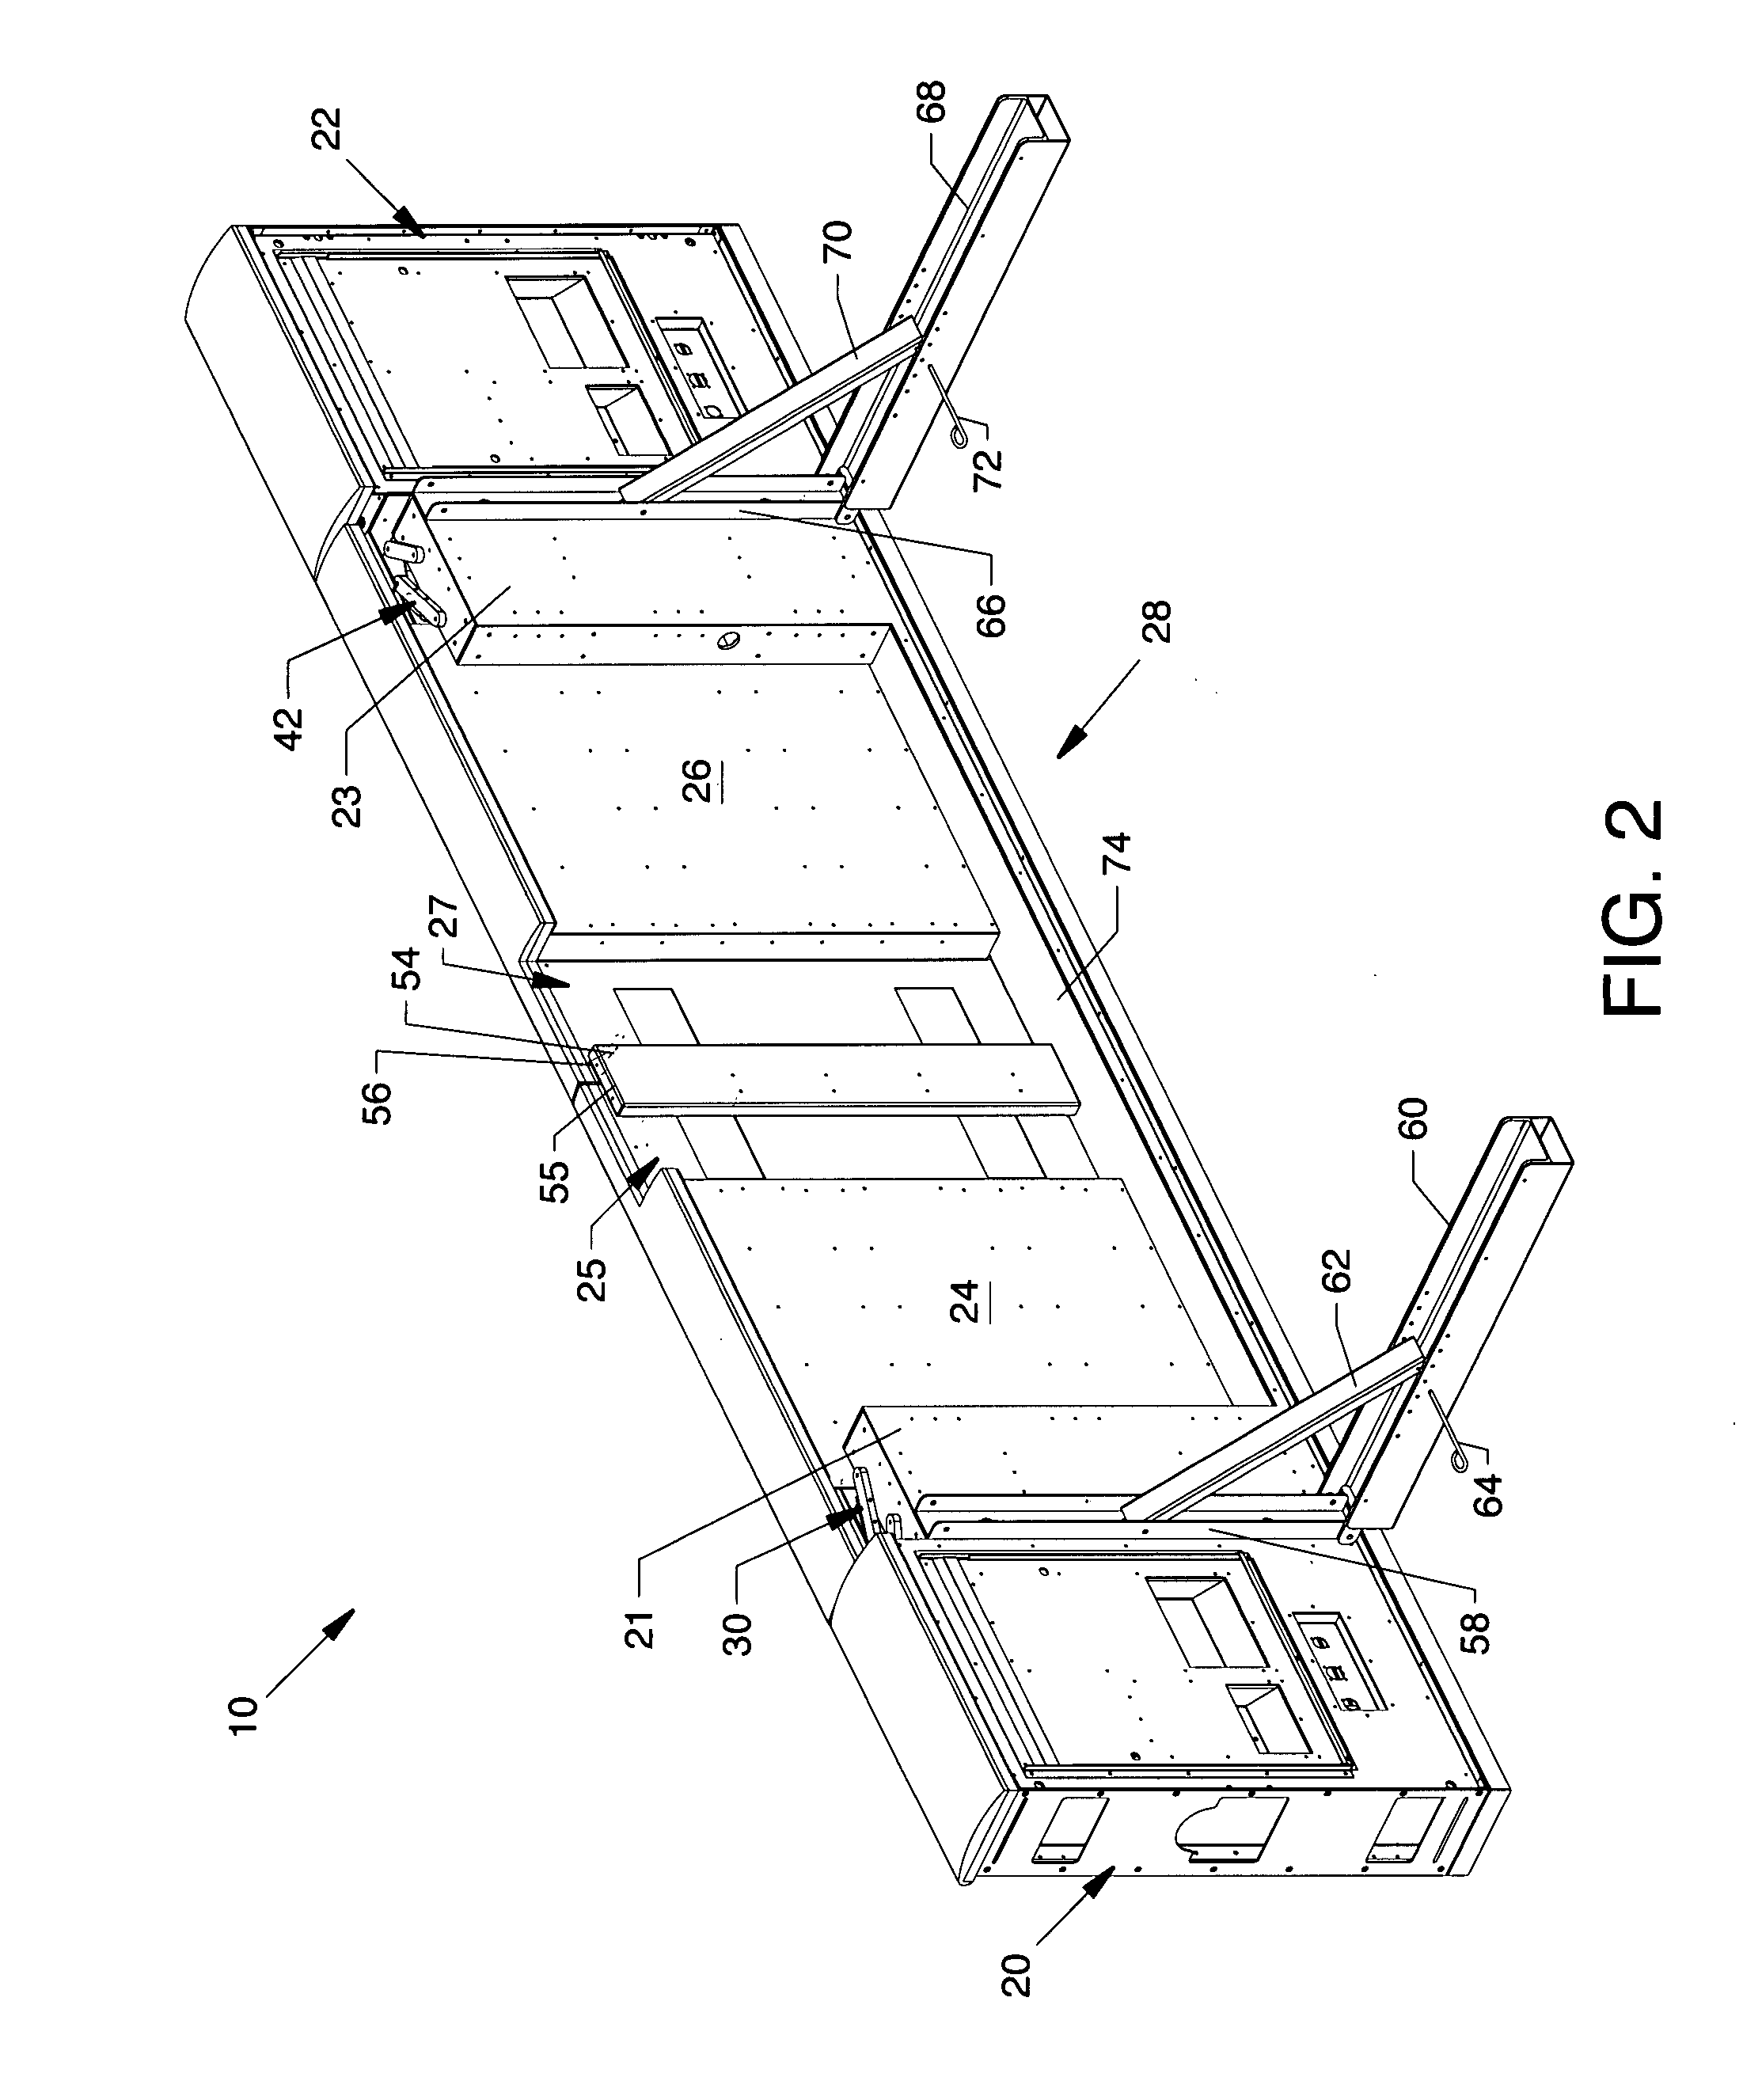 Safety gate system having an electronic display